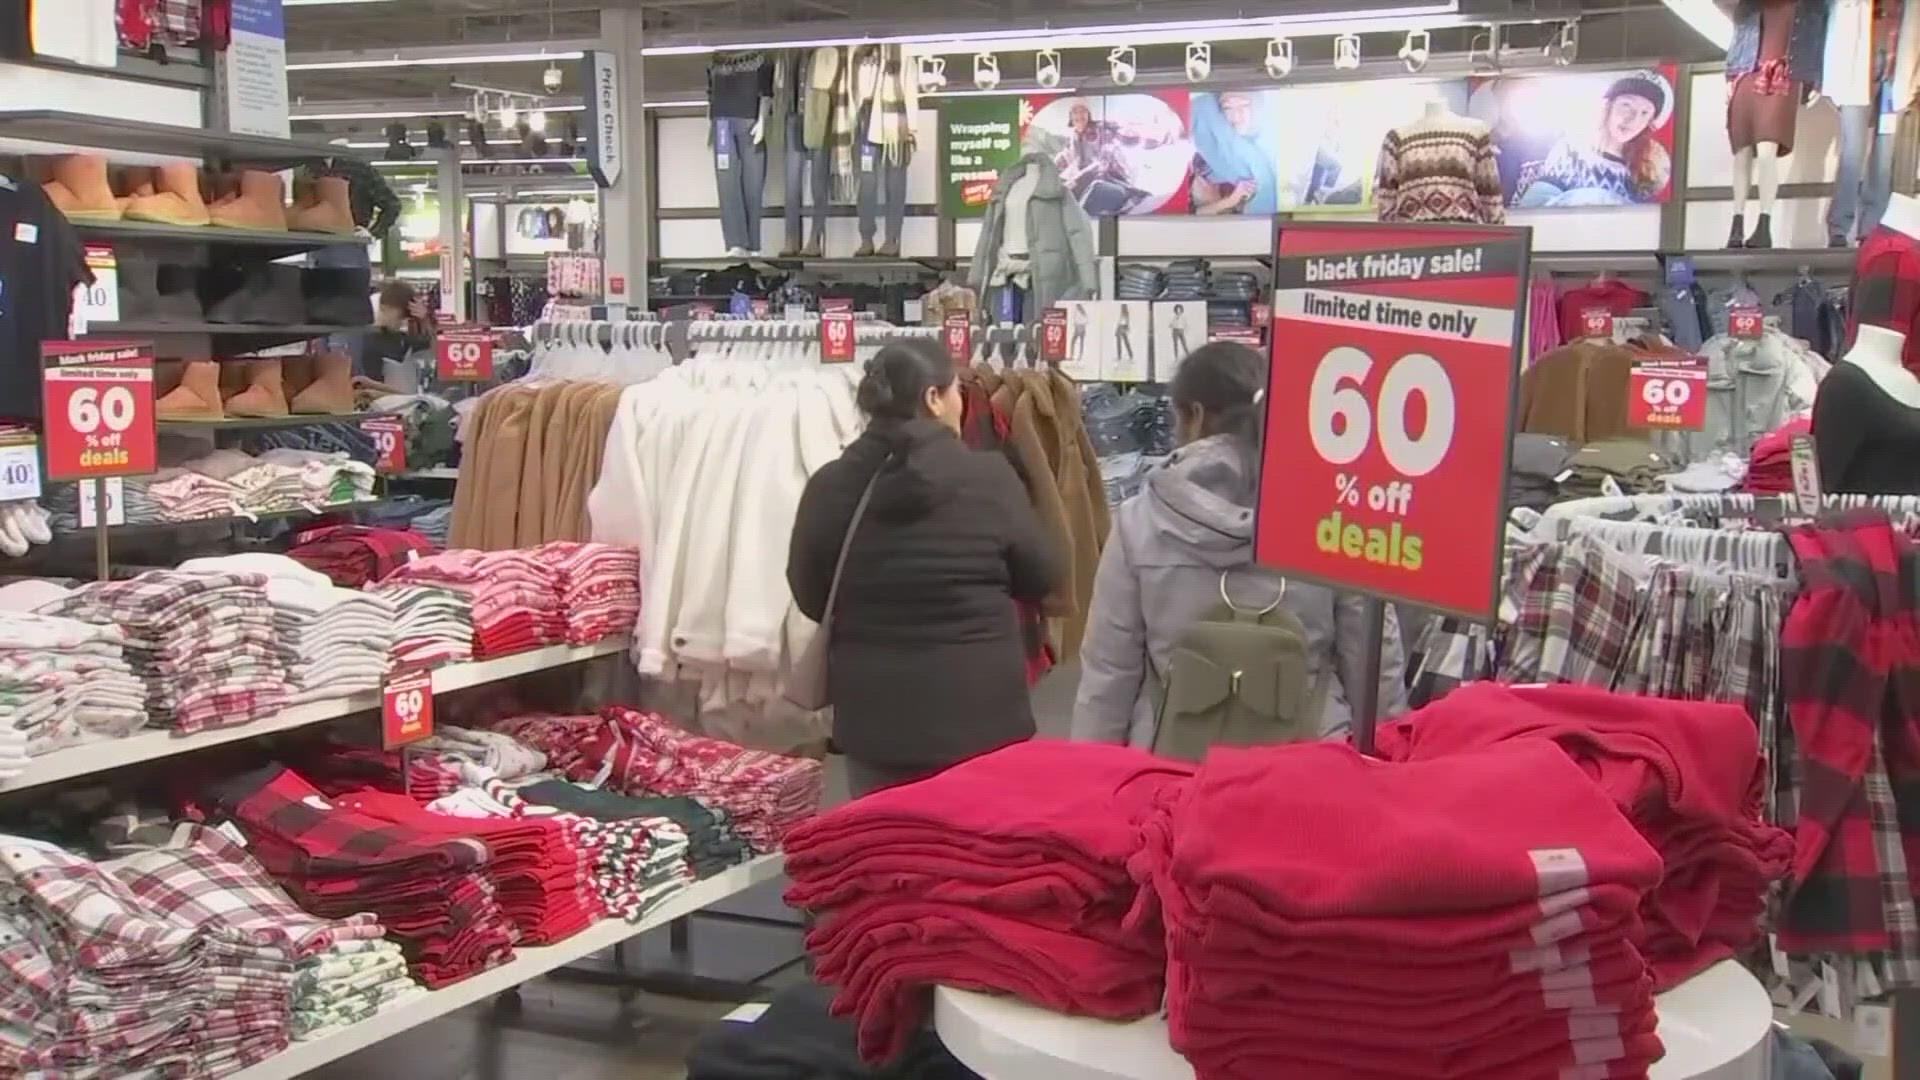 A recent survey found that nine out of 10 people haven't begun their holiday shopping, but experts say budgeting could help you save.